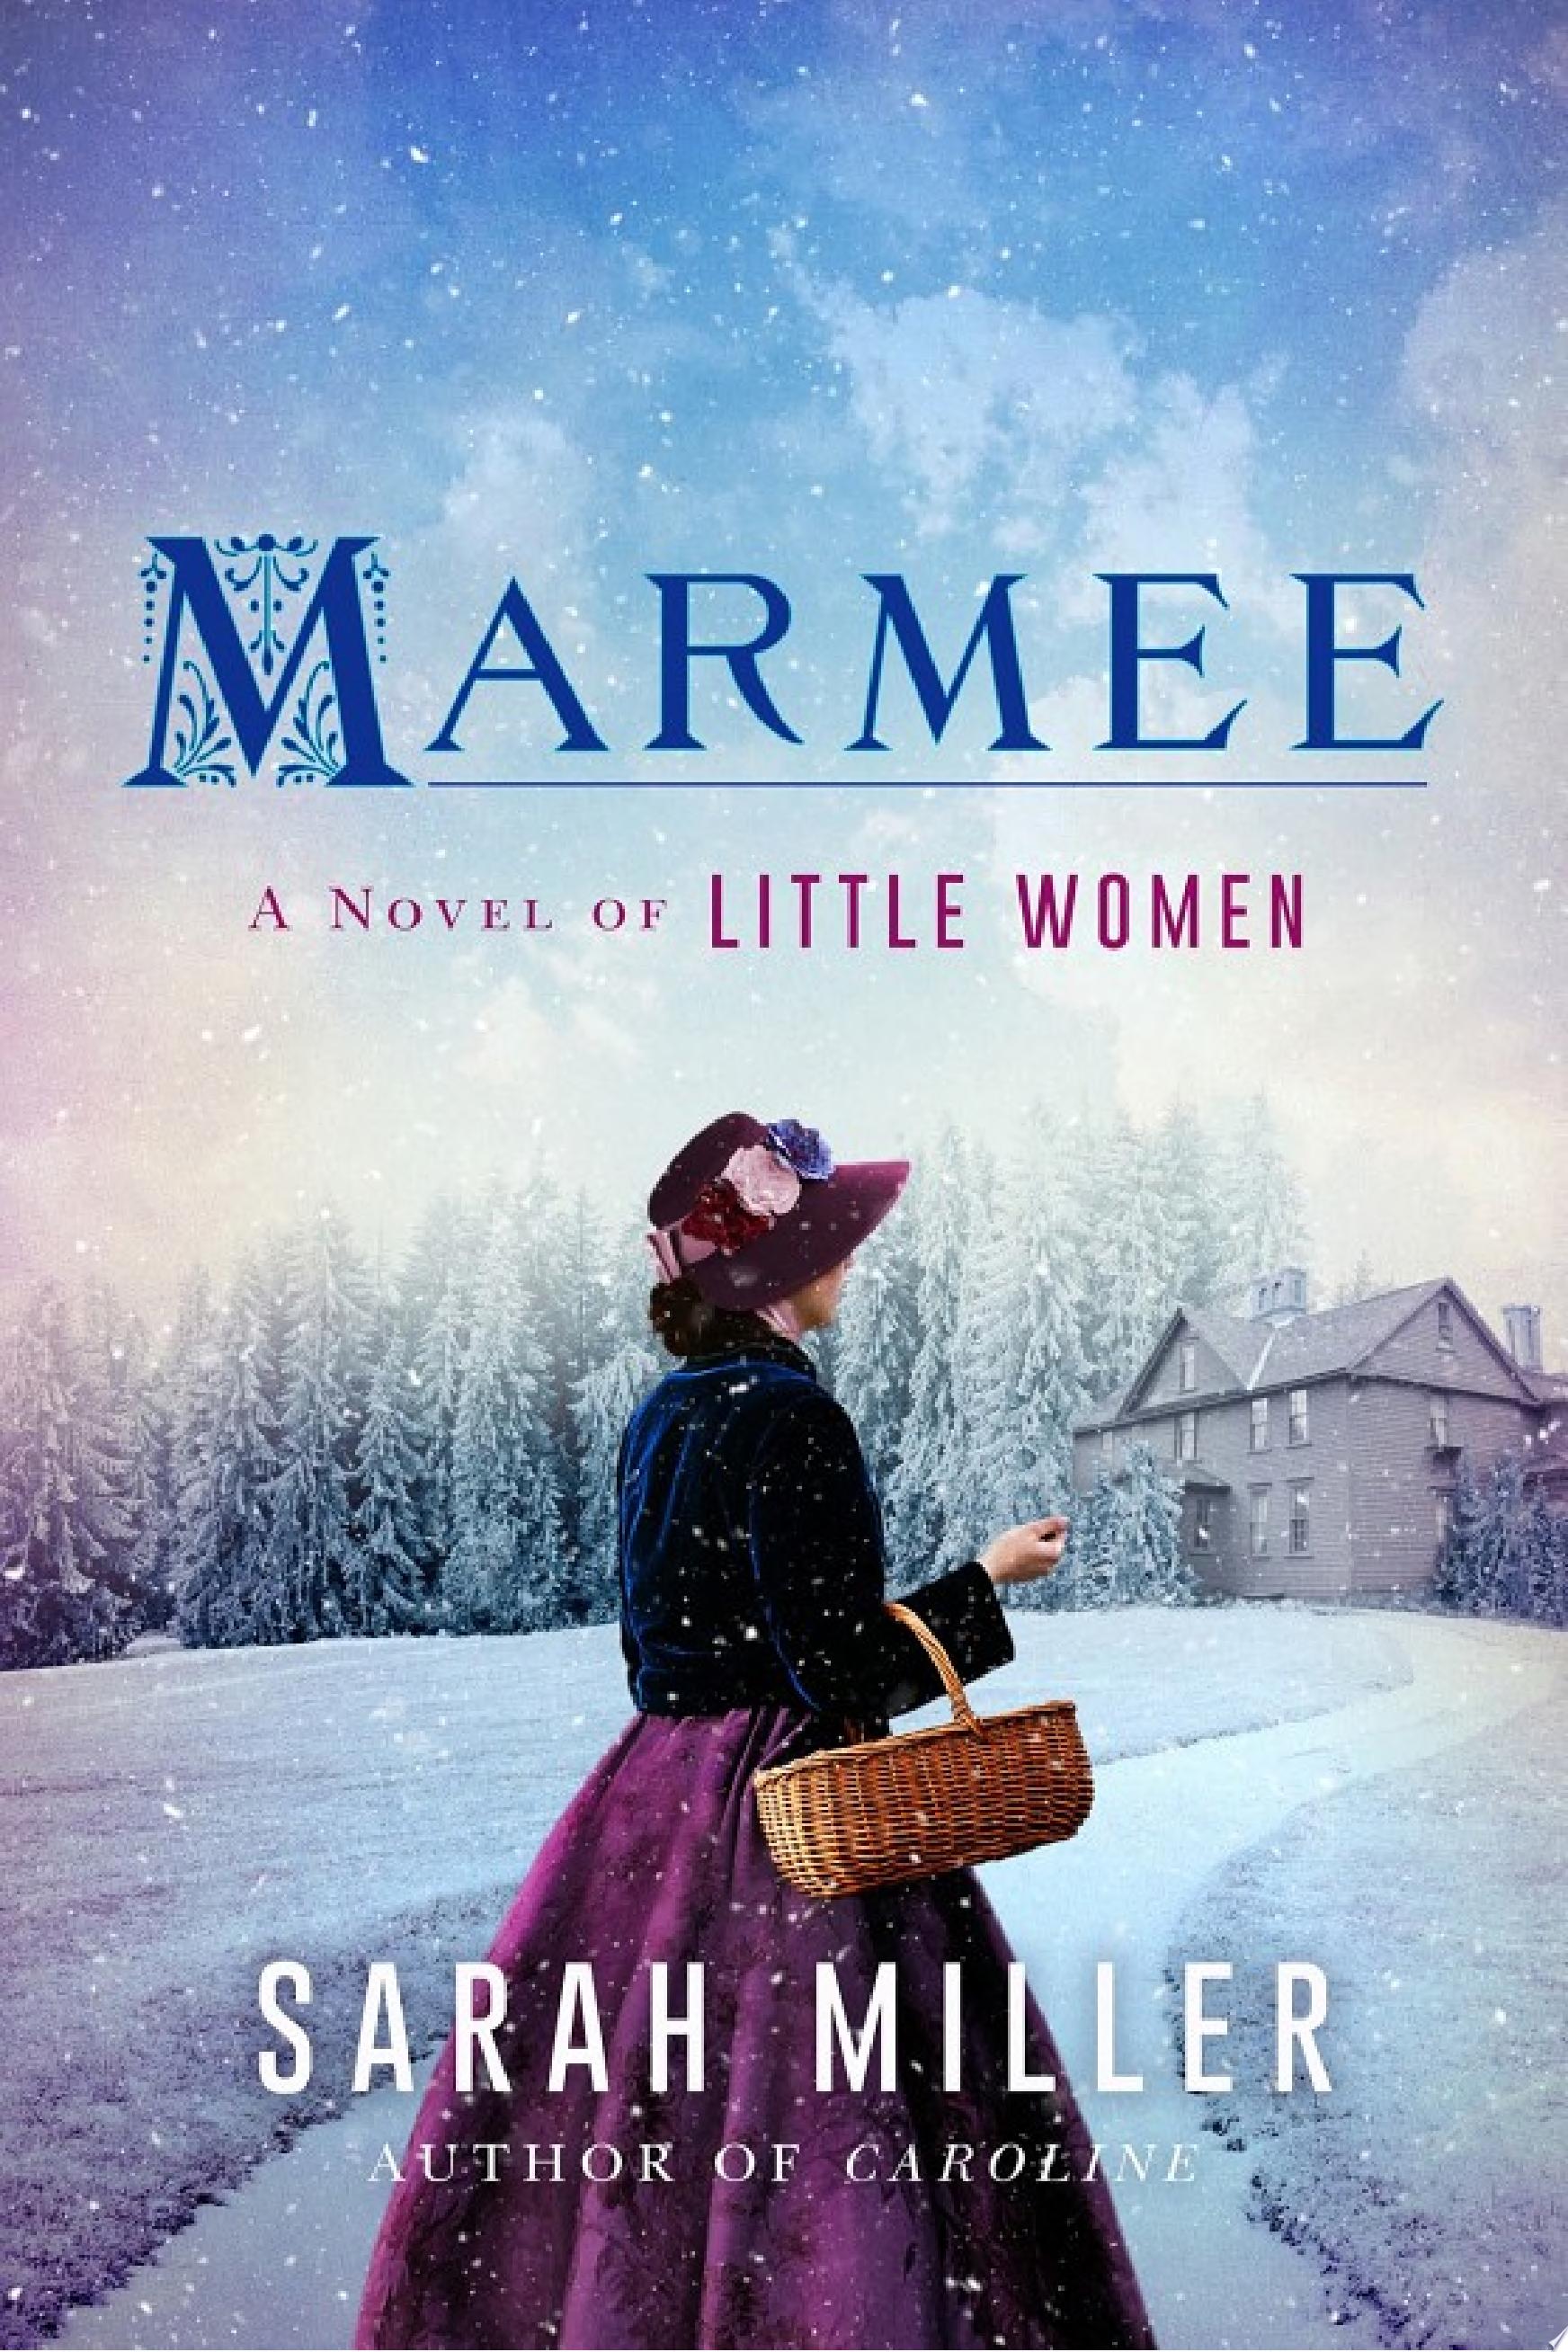 Image for "Marmee"